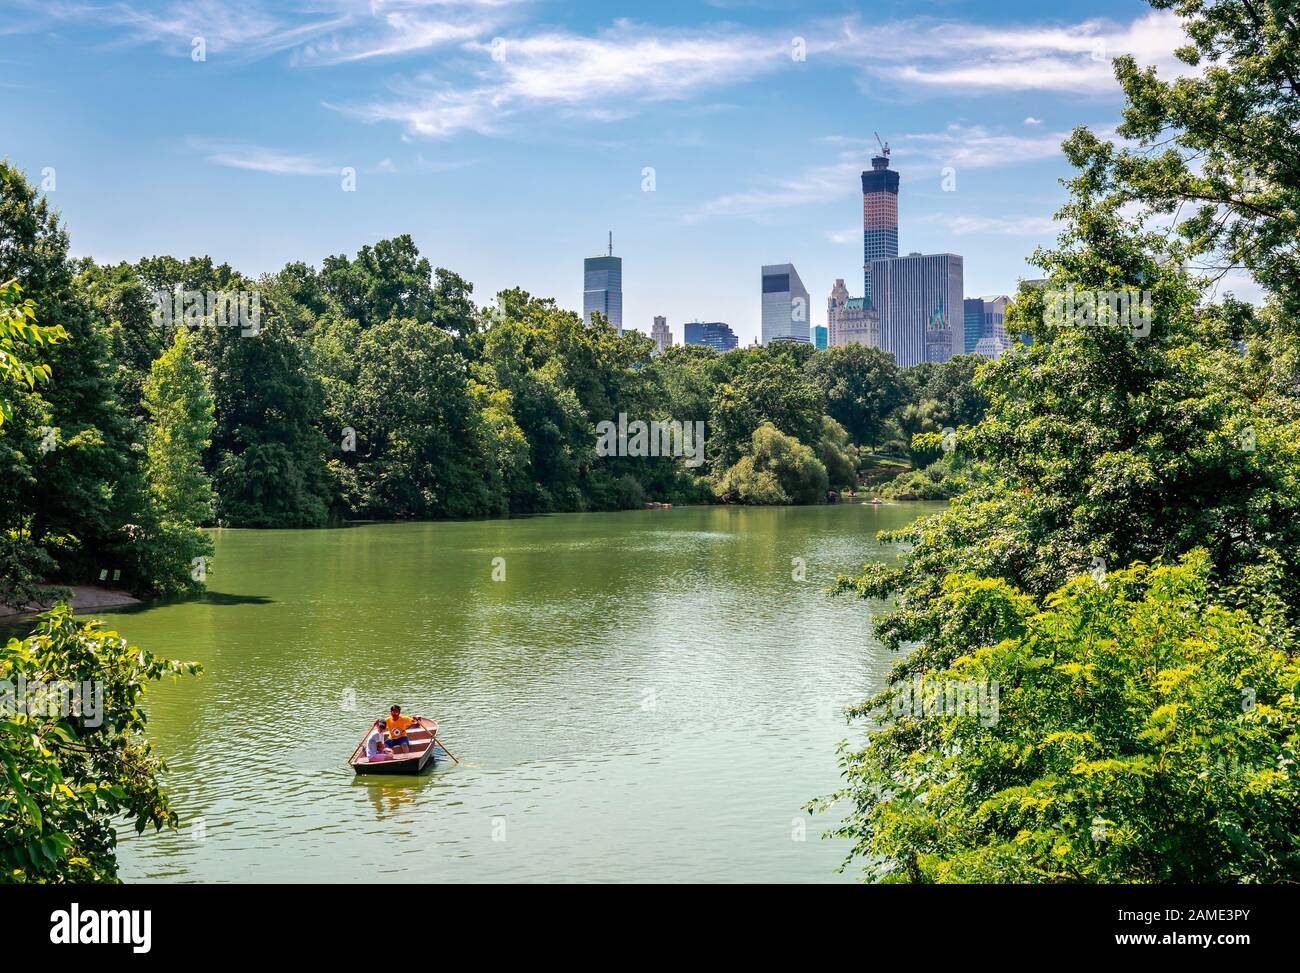 NYC, NY / USA - July 12 2014: View of the Lake of the Central Park with the West Side Manhattan skyline in the background. Stock Photo